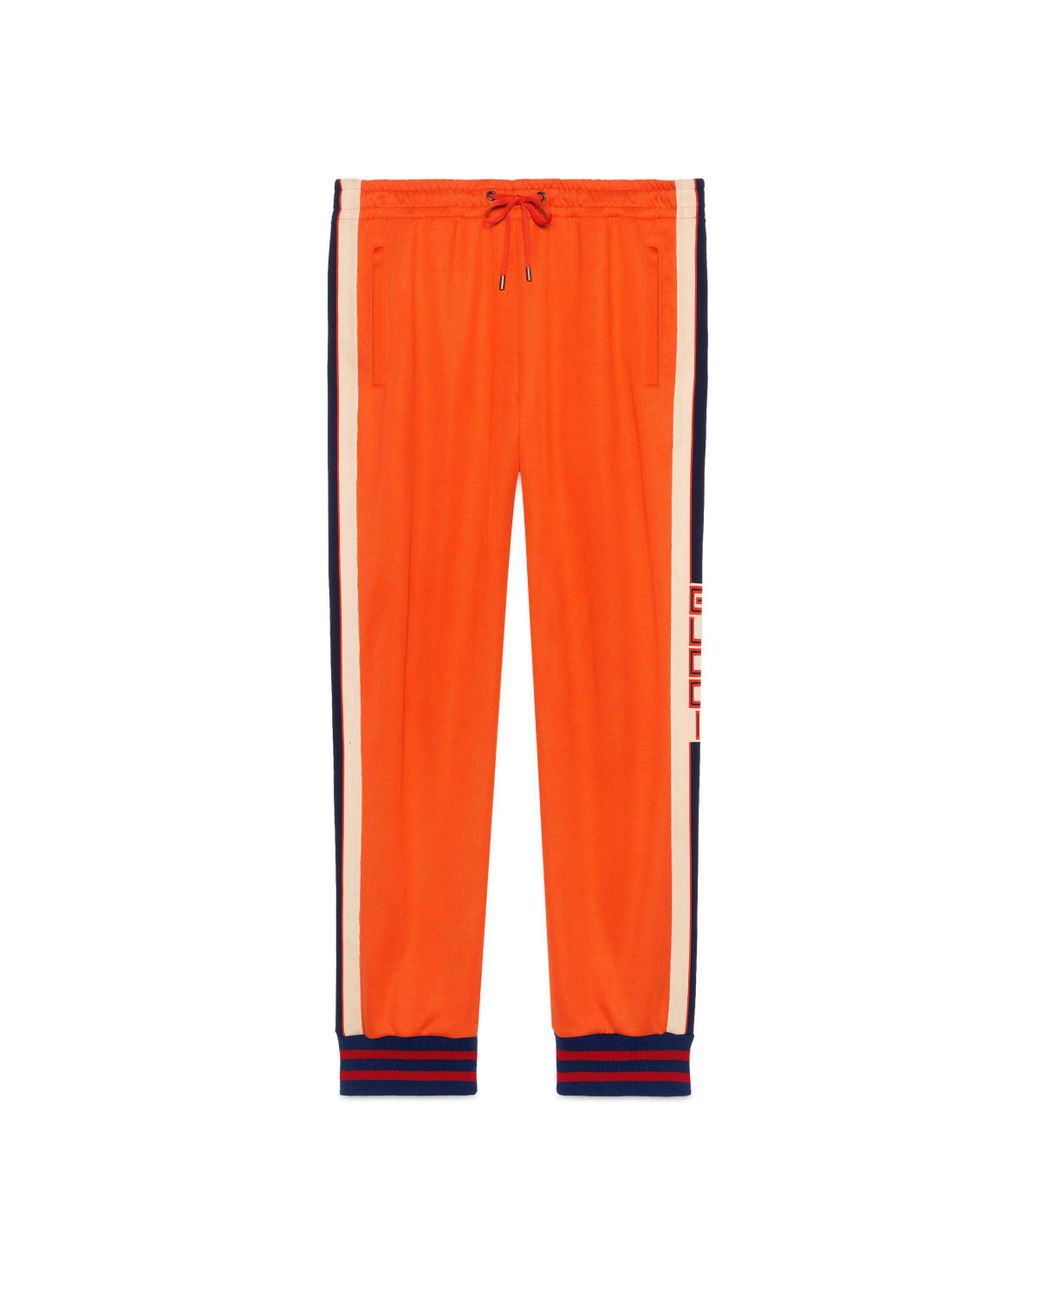 Gucci Technical Jersey Pant in Orange for Men